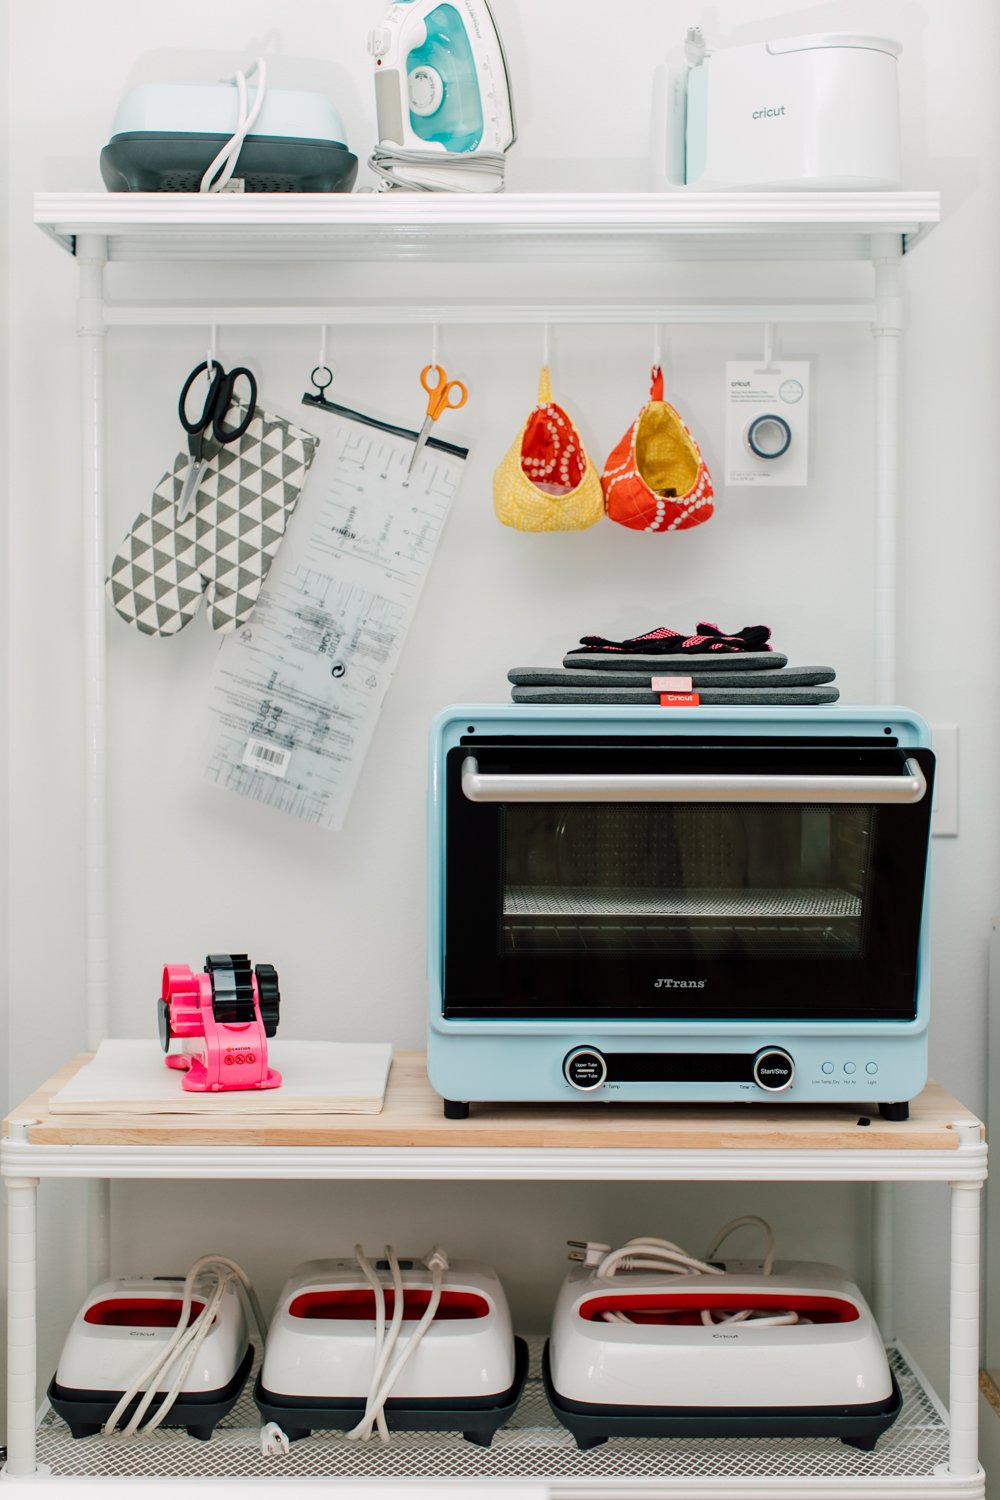 Craft room tour: baker's rack with blue convection oven, several Easypresses, and supplies hanging from hooks.